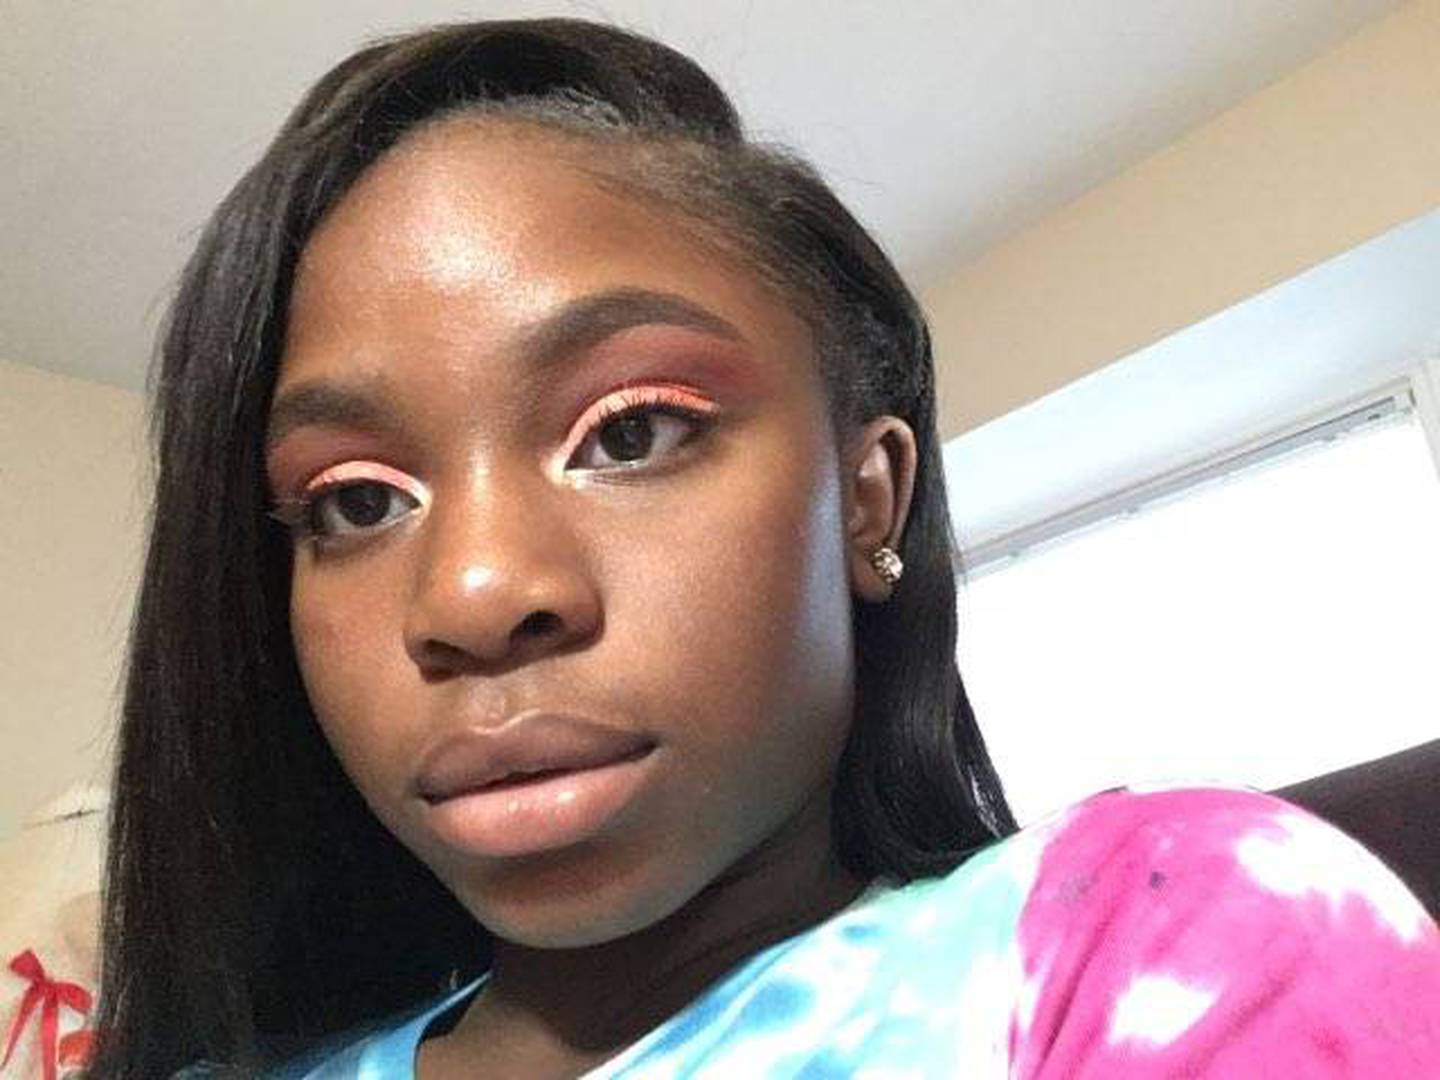 Dykota Morgan, 15, of Bolingbrook was an athlete, artist, activist and scholar. She died of complications from COVID-19 on May 4. The Will County Health Department is holding a COVID-19 vaccination clinic in her honor on June. 16.